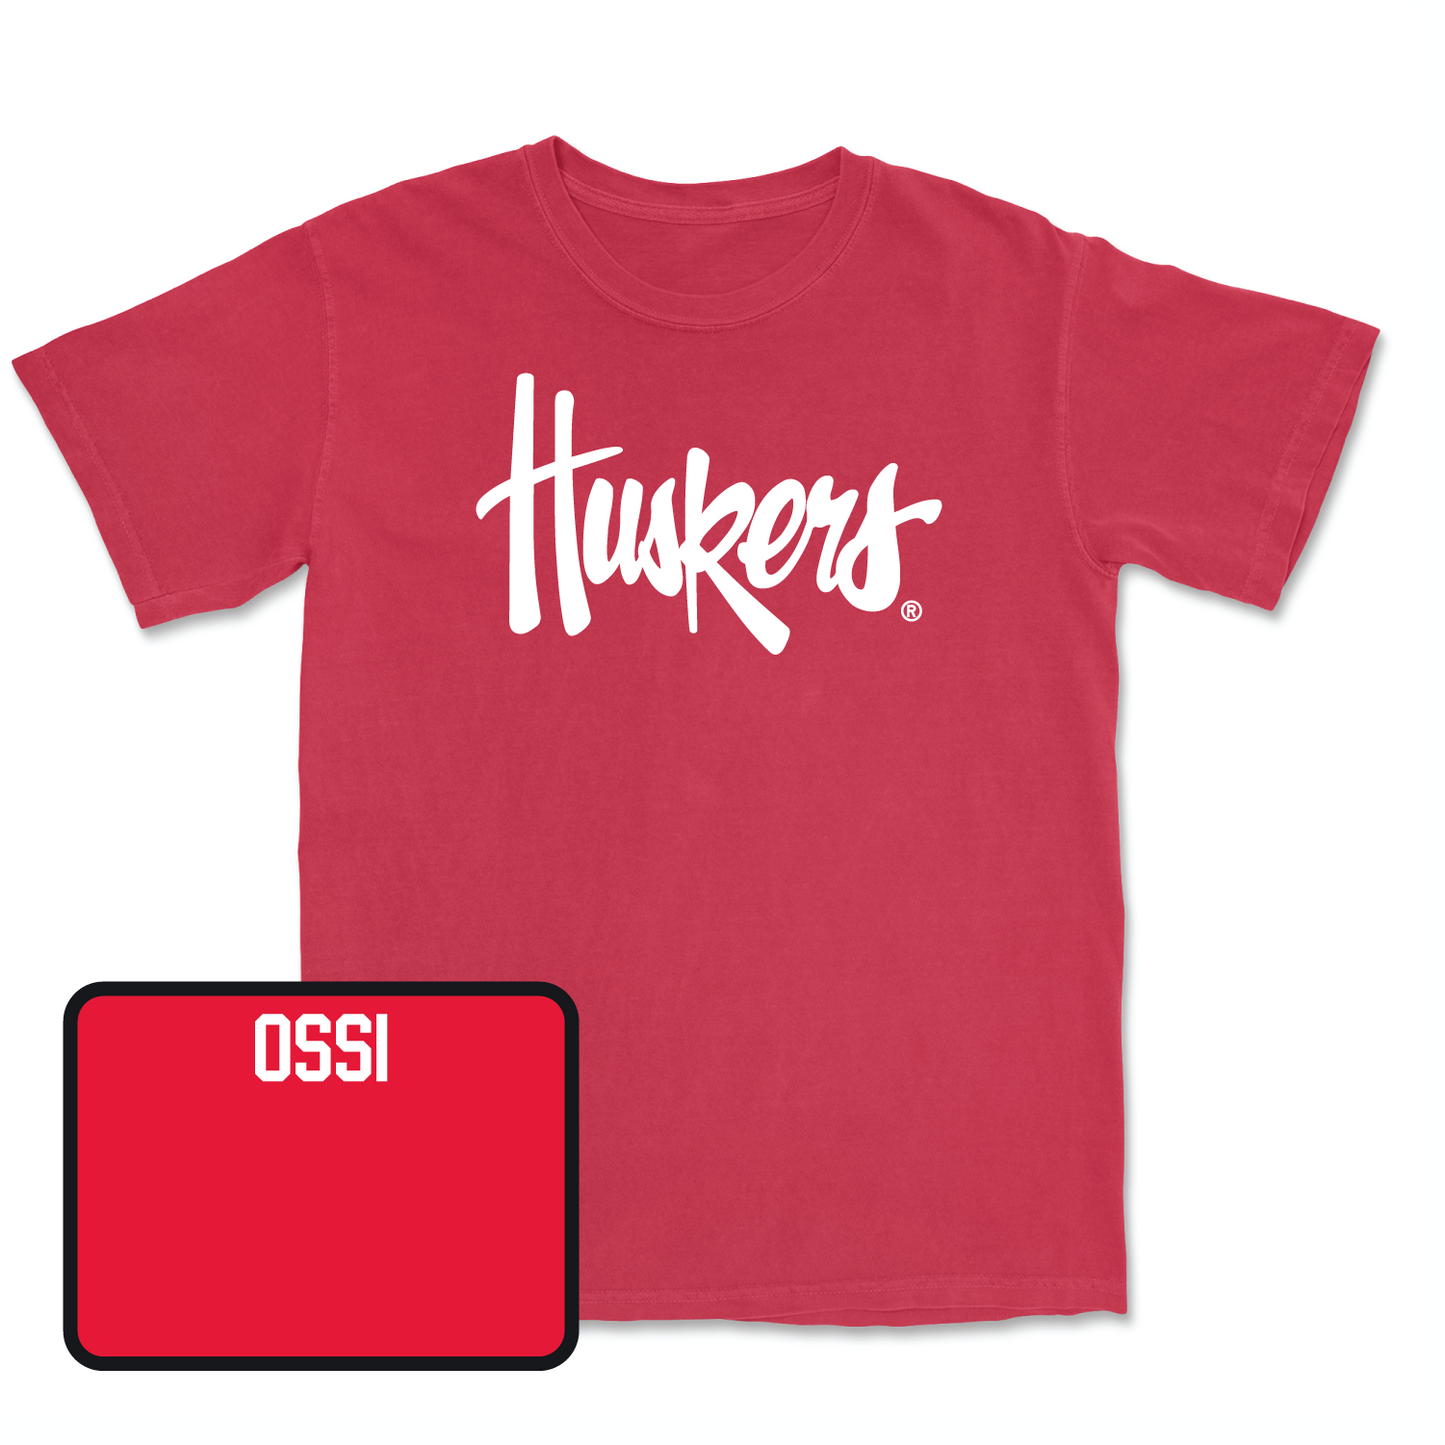 Red Women's Rifle Huskers Tee Youth Medium / Cecelia Ossi